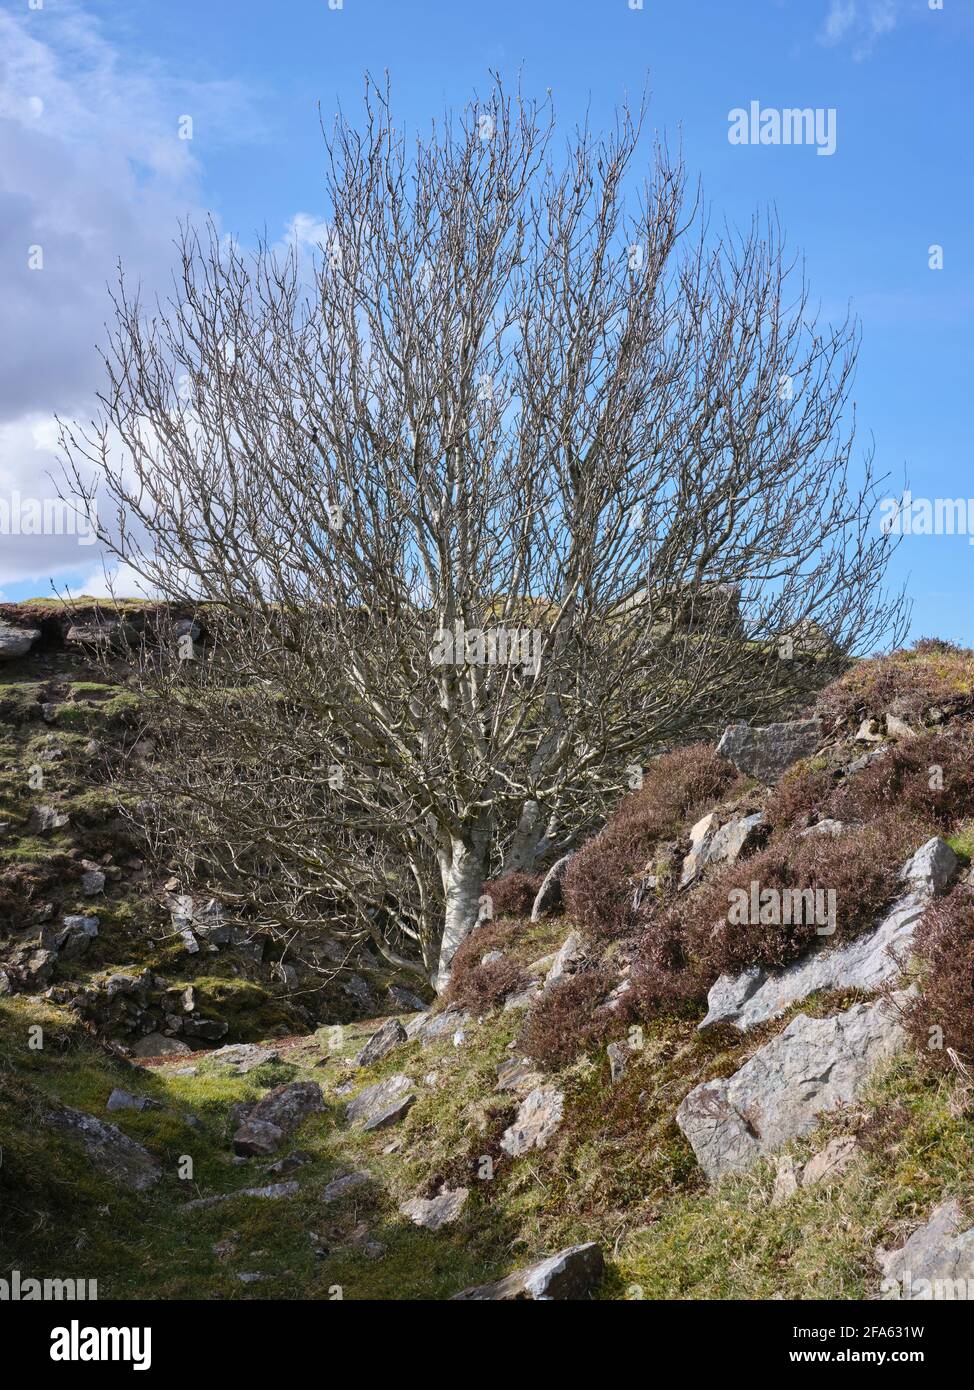 A Rowan tree grows at an unusual angle from a rocky outcrop in an abandoned old stone quarry Stock Photo